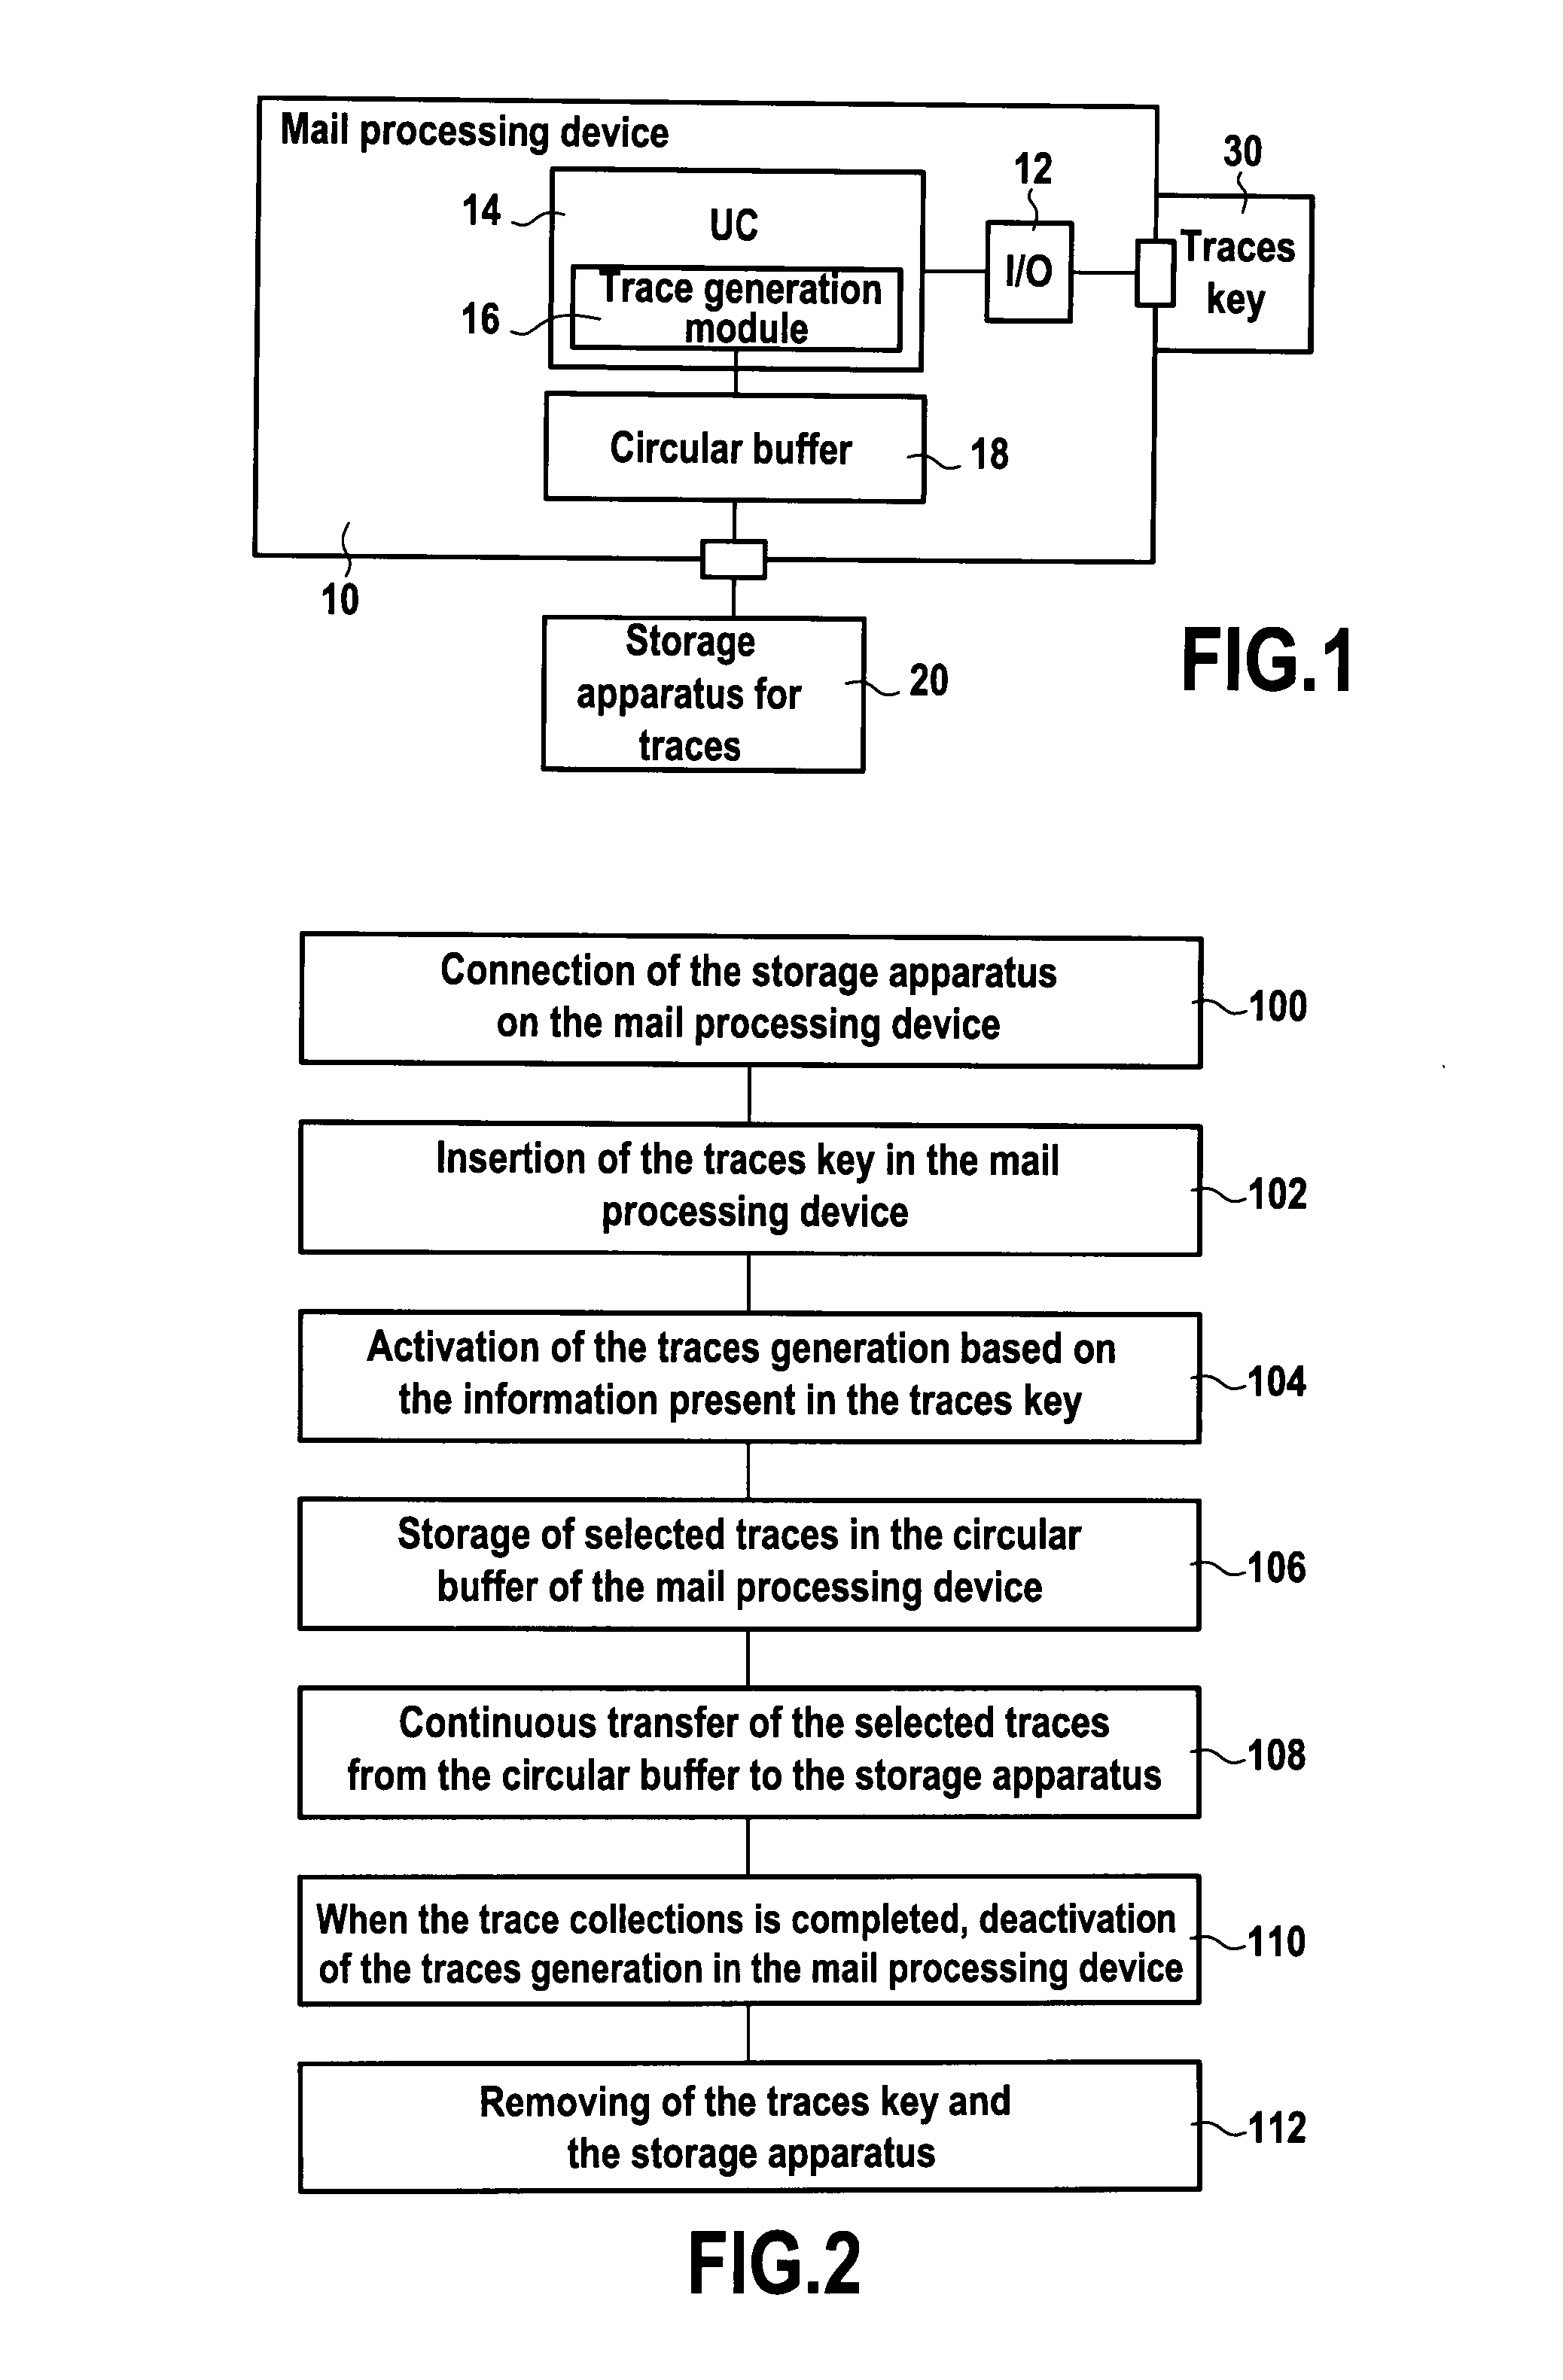 Secured management of traces in a mail processing device